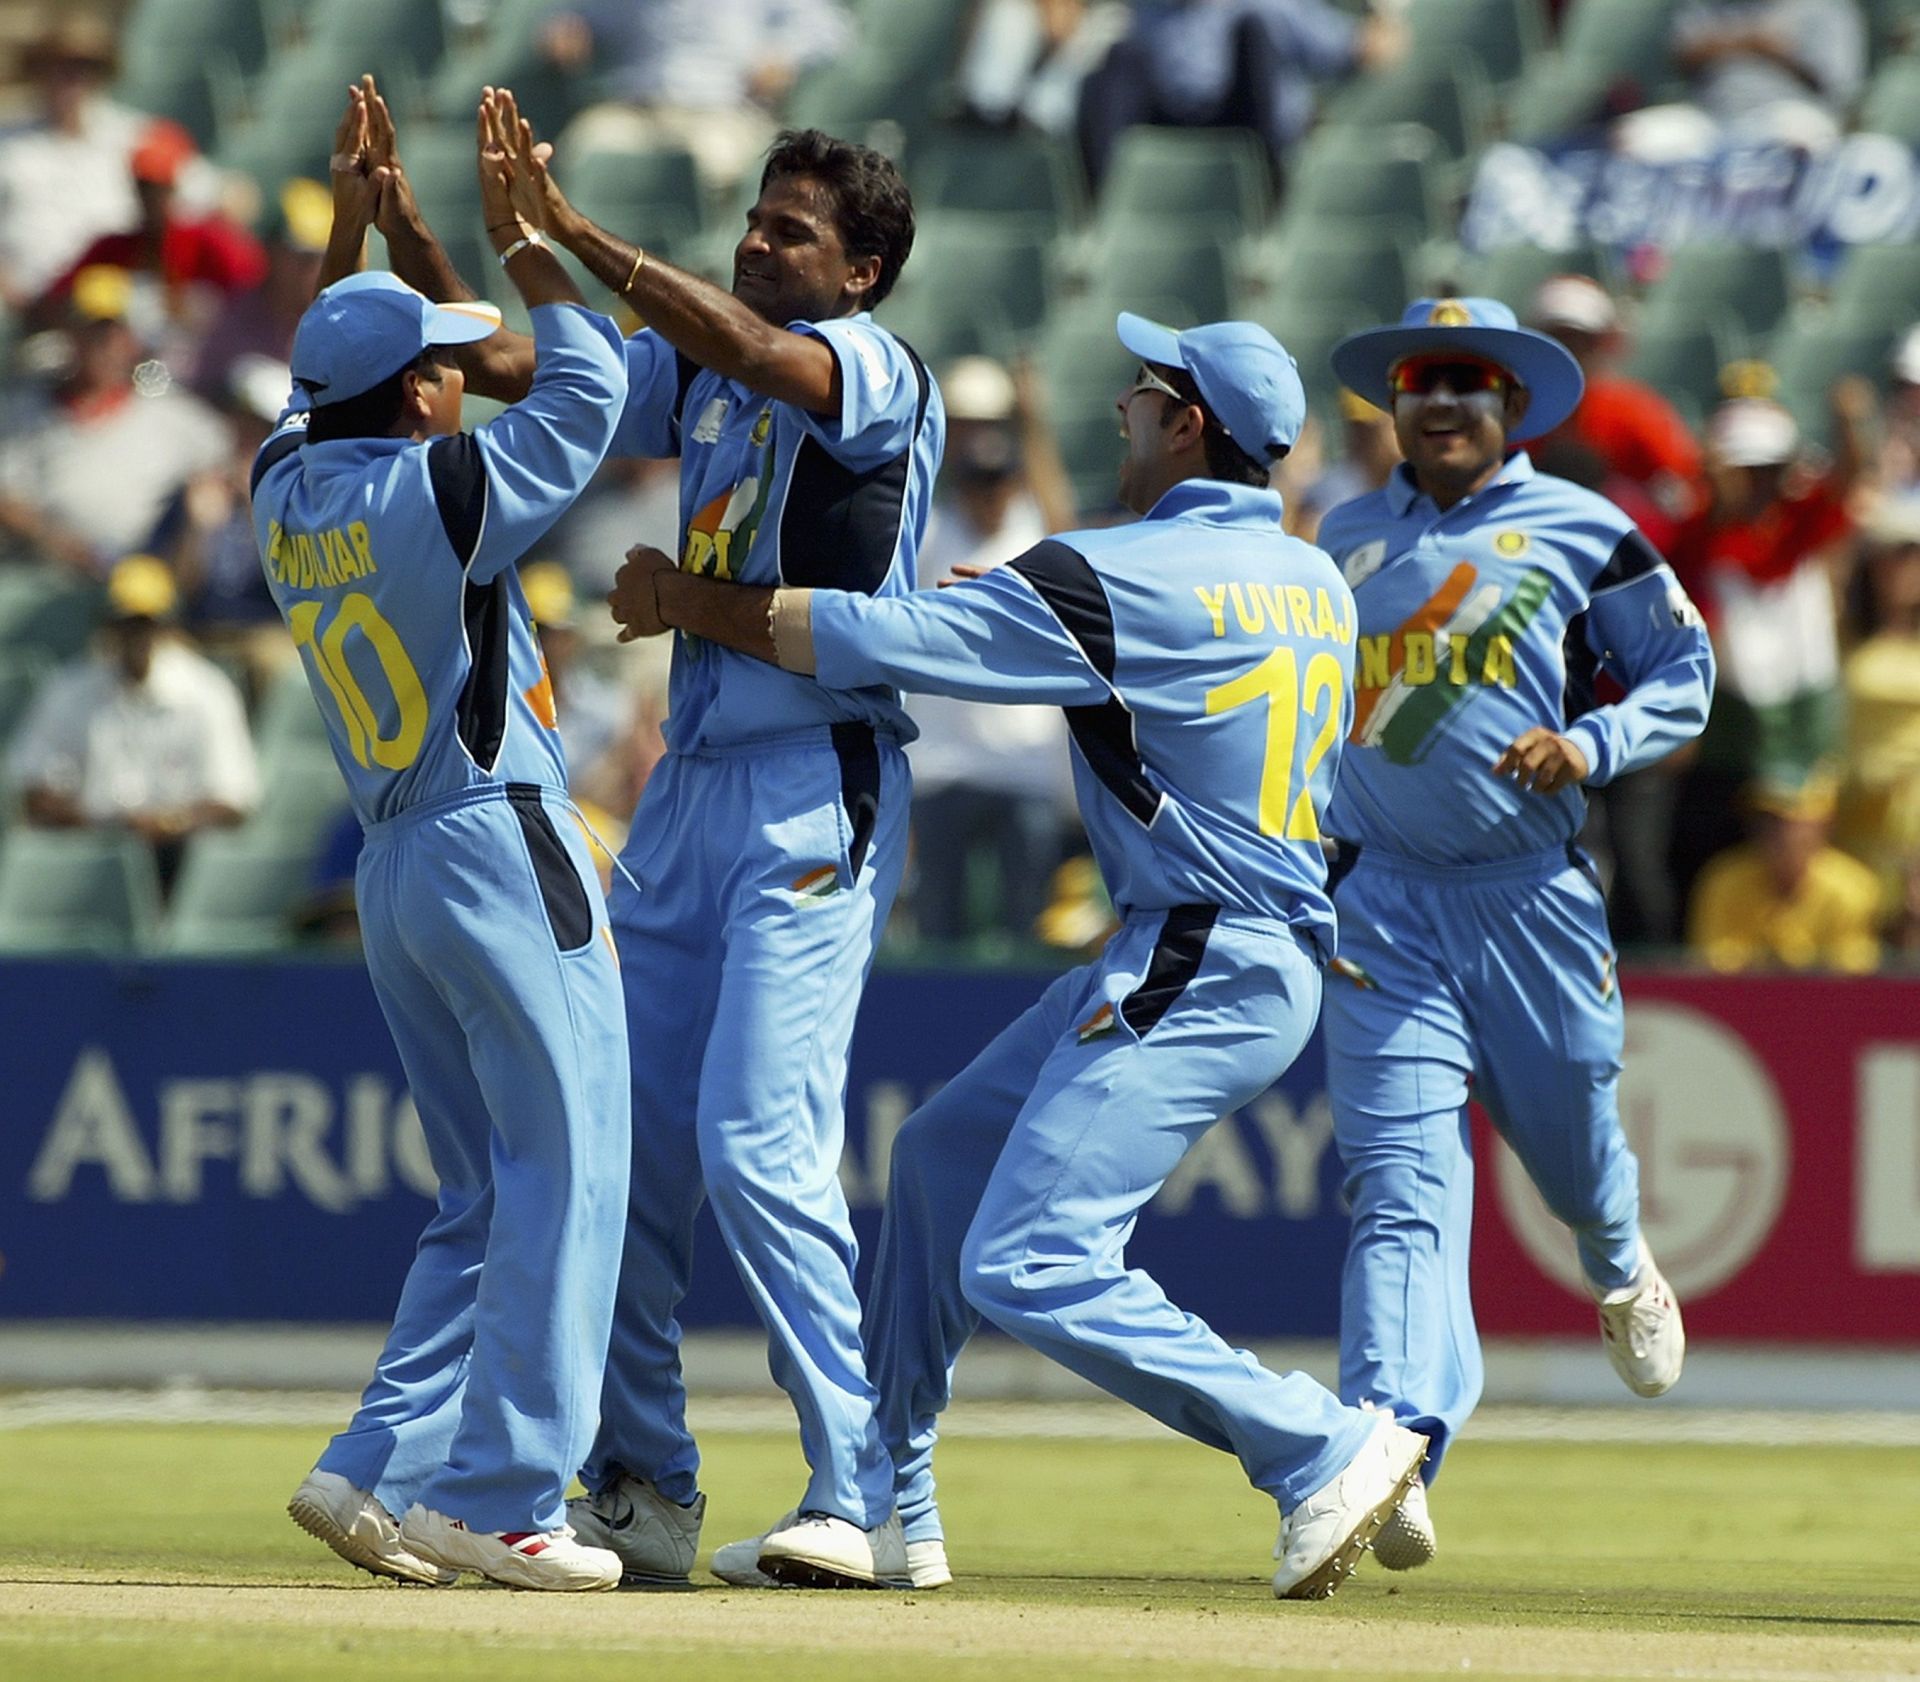 Javagal Srinath of India is congratulated by team-mates after taking a wicket